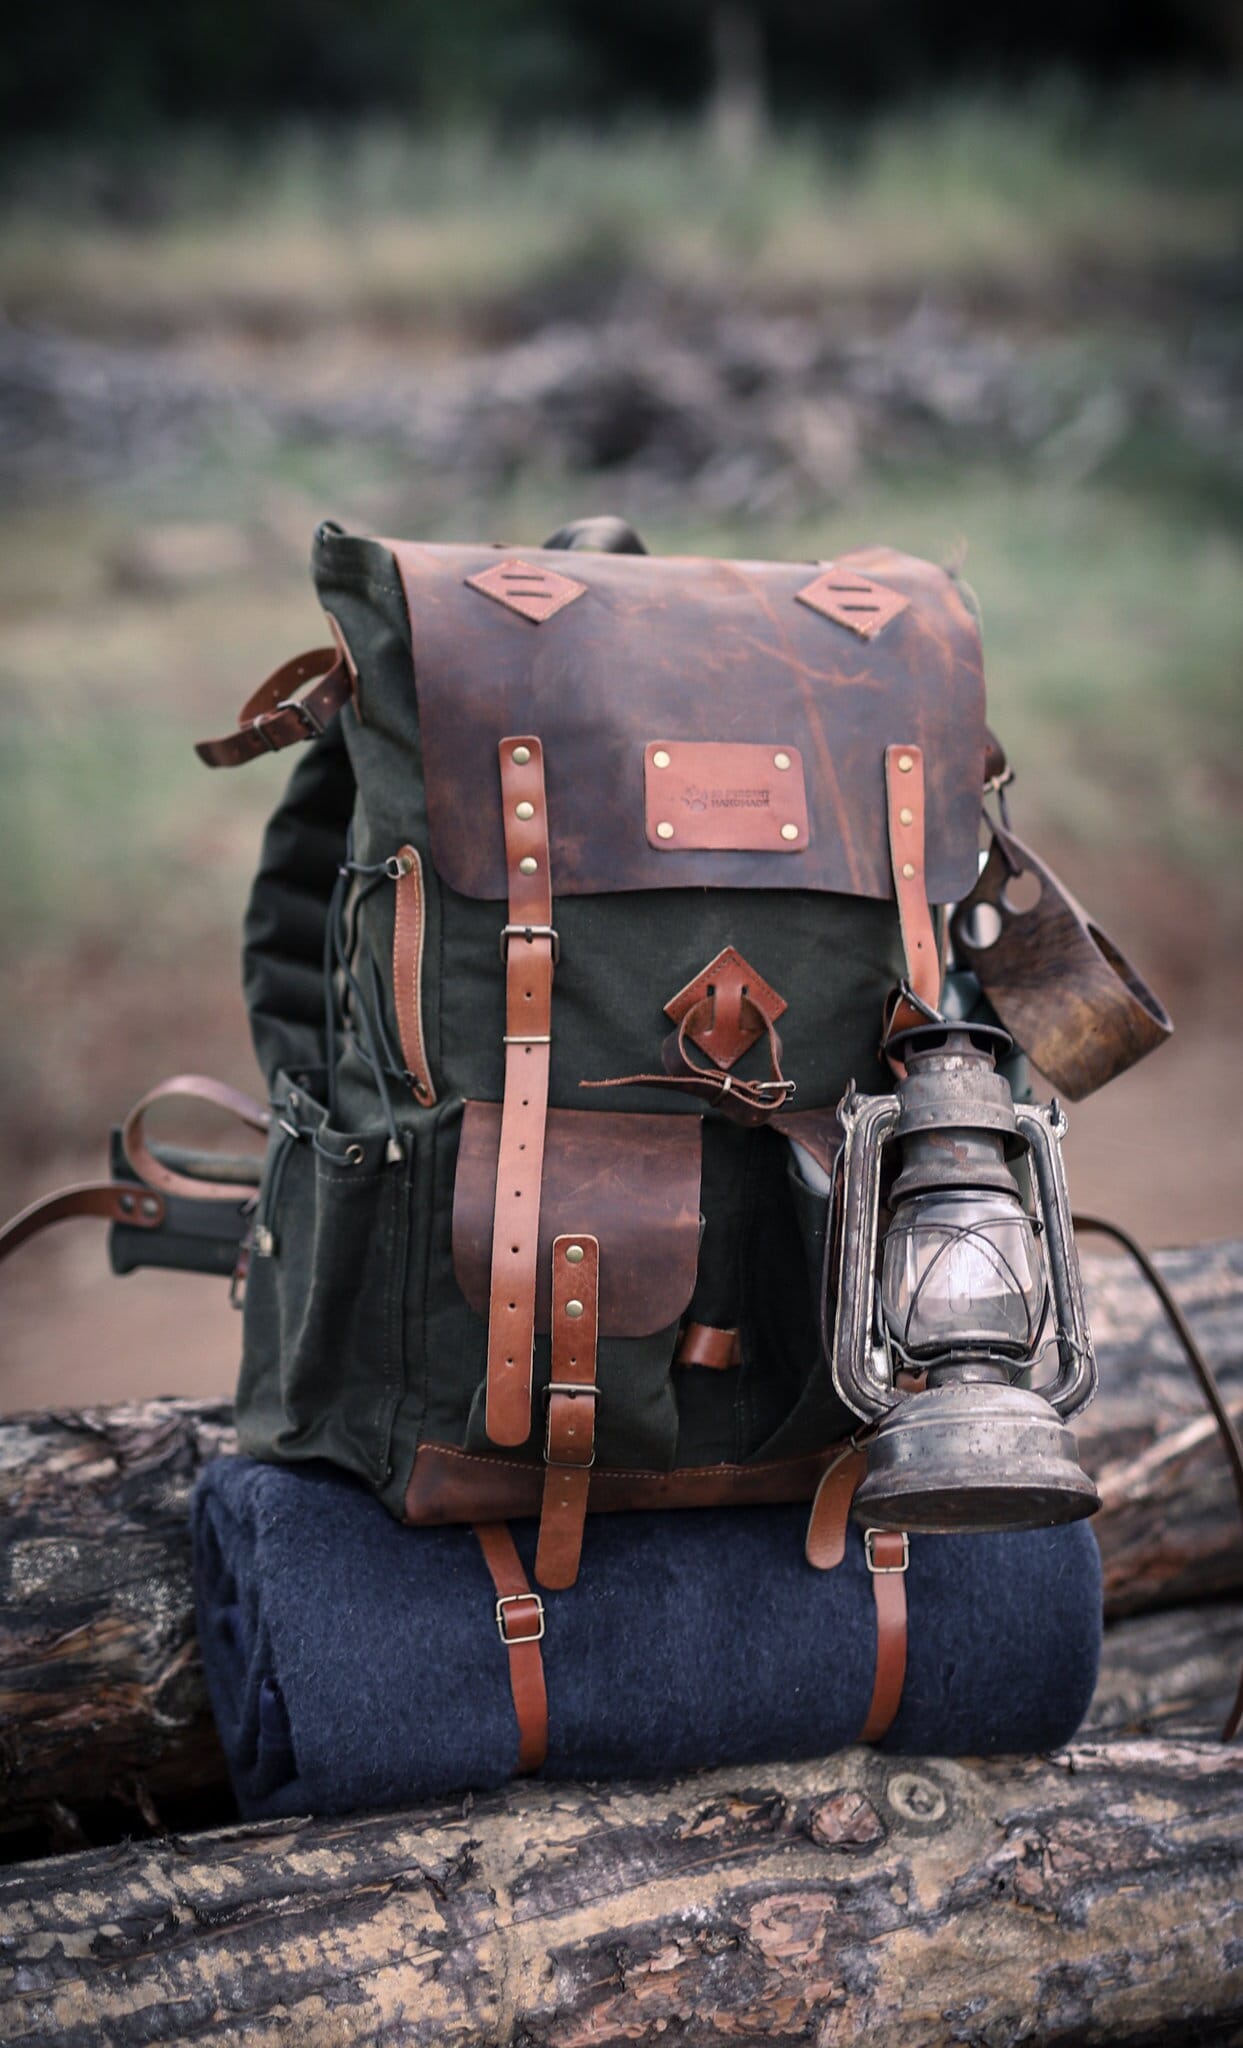 Green Brown Black Hiking Backpack  30 Liter to 80 Liter options waxed canvas and leather  99percenthandmade   